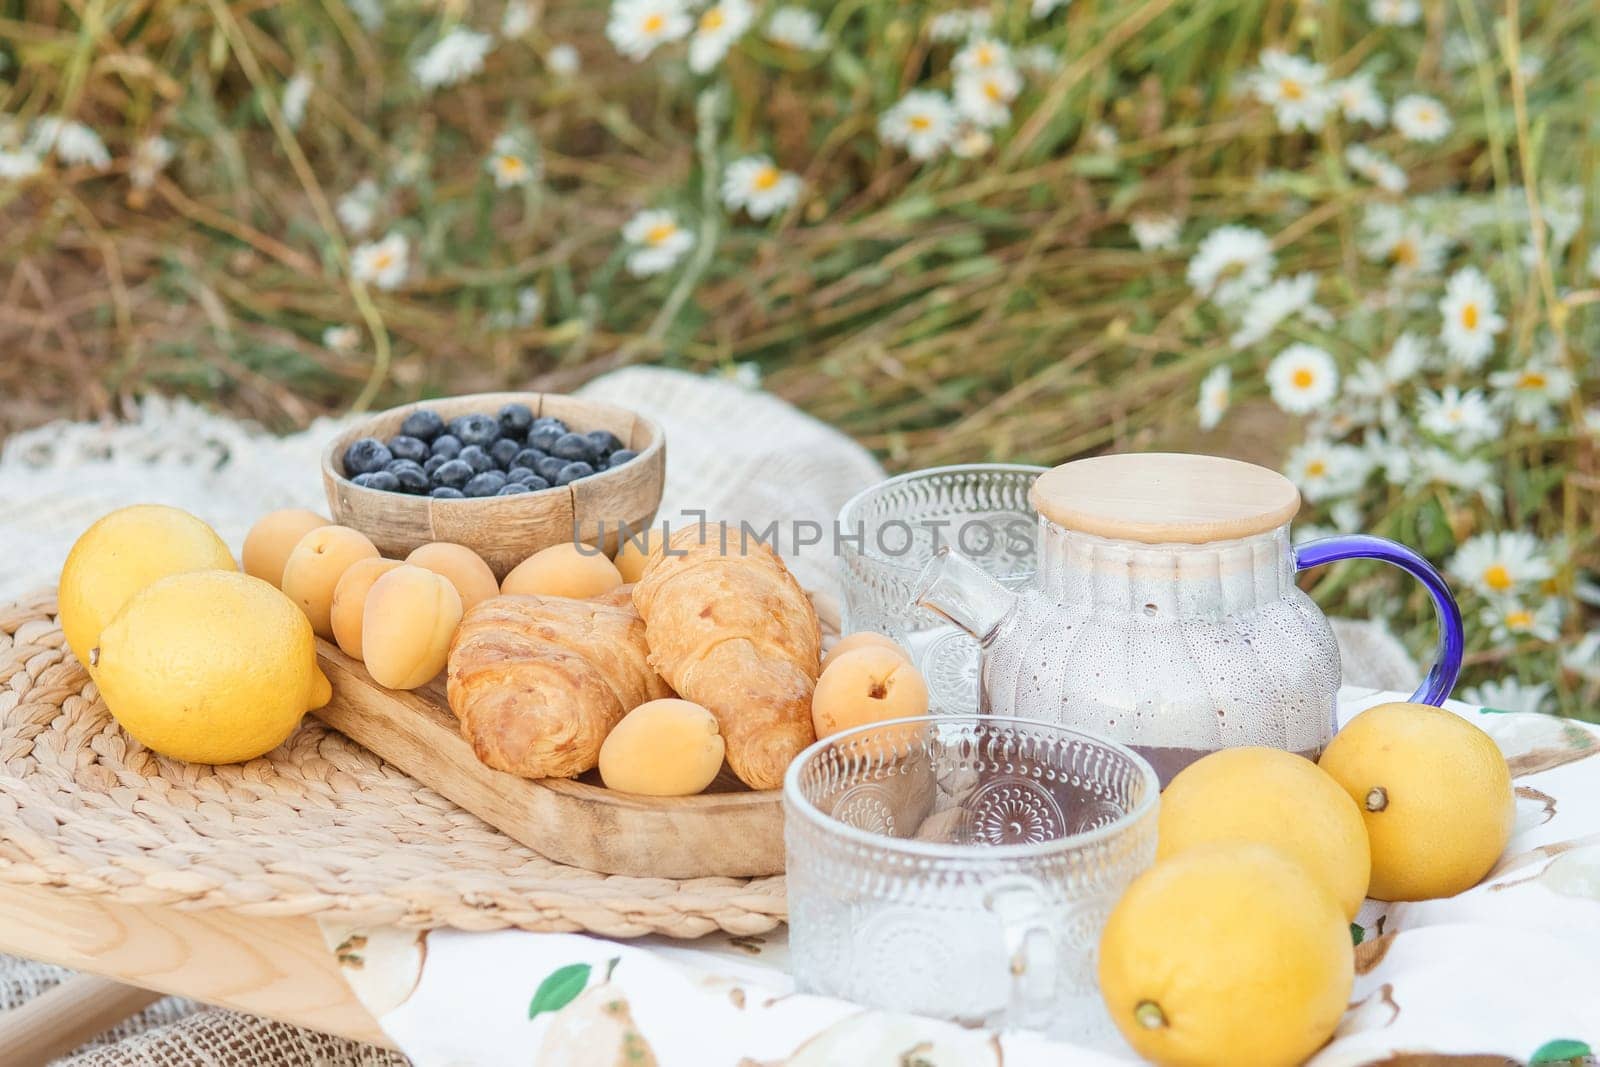 Picnic in the chamomile field. A large field of flowering daisies. The concept of outdoor recreation. by Annu1tochka